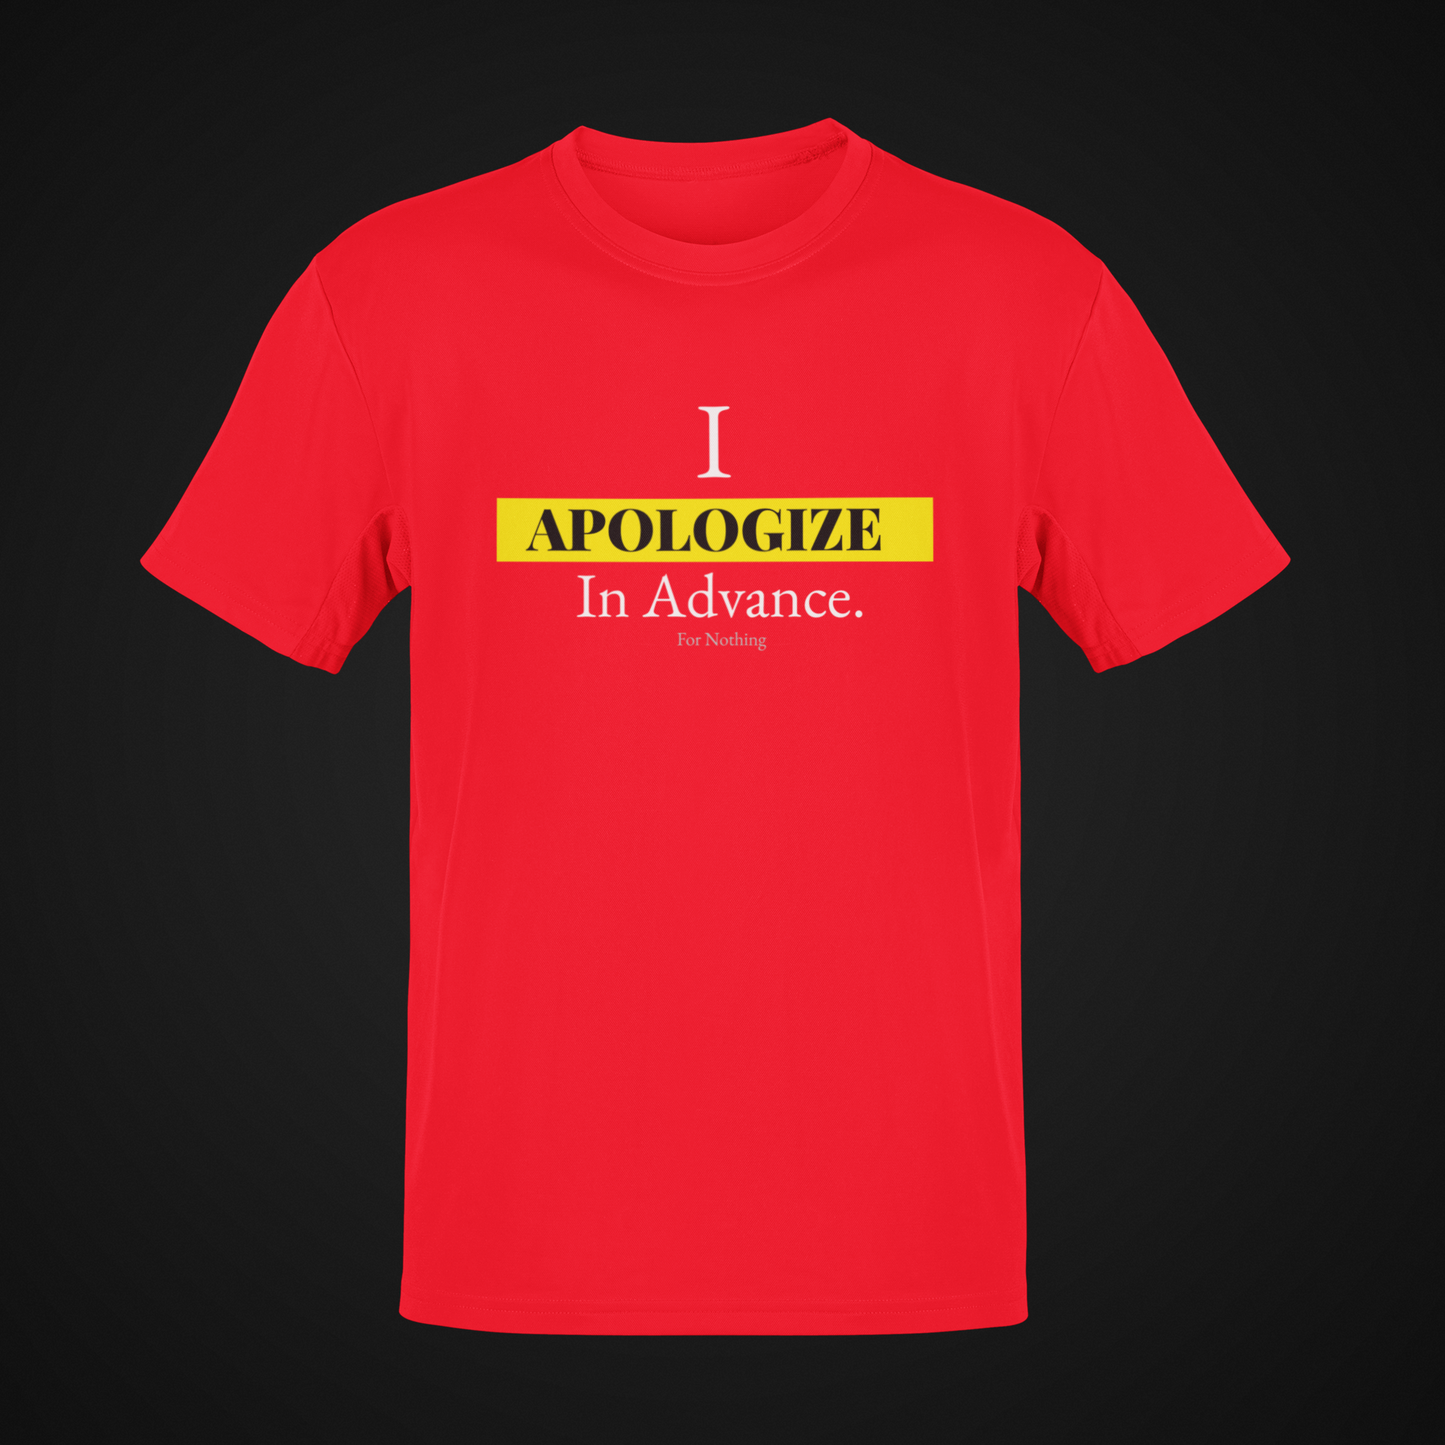 I Apologize In Advance... for Nothing T-shirt